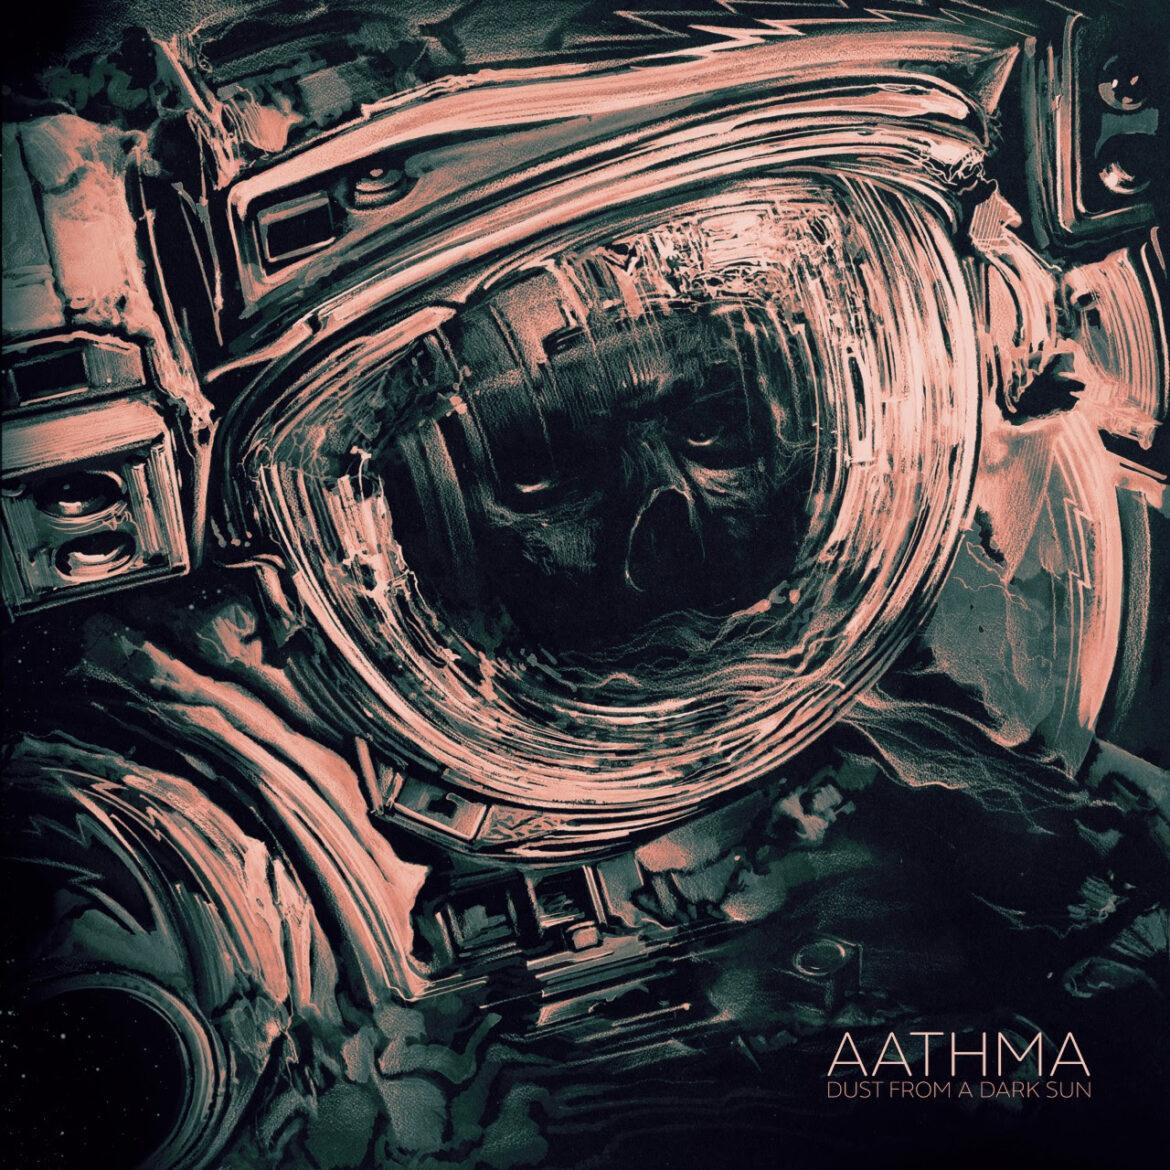 AATHMA – Debut New Music Video